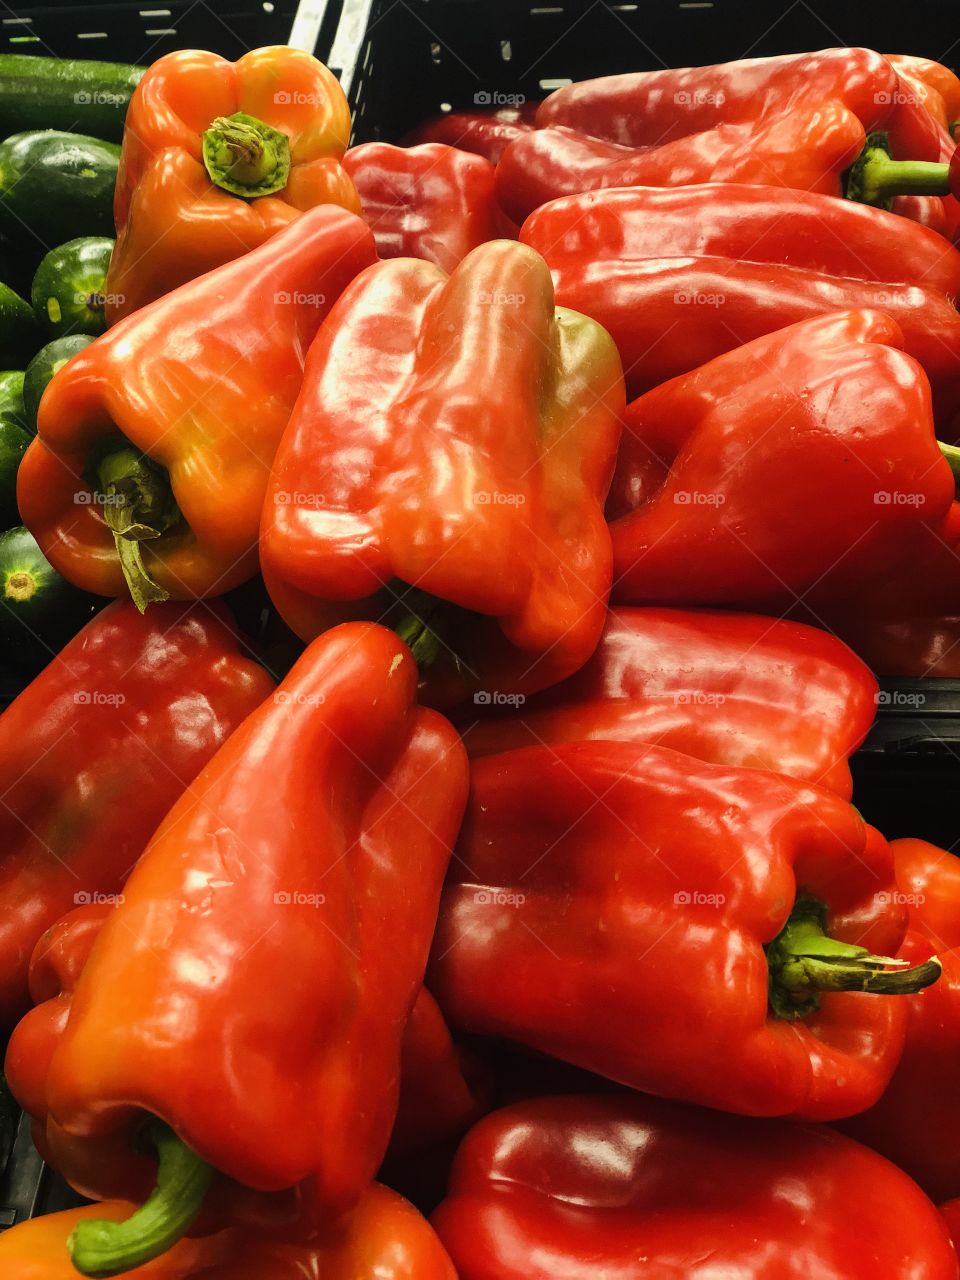 Red Bell Peppers 